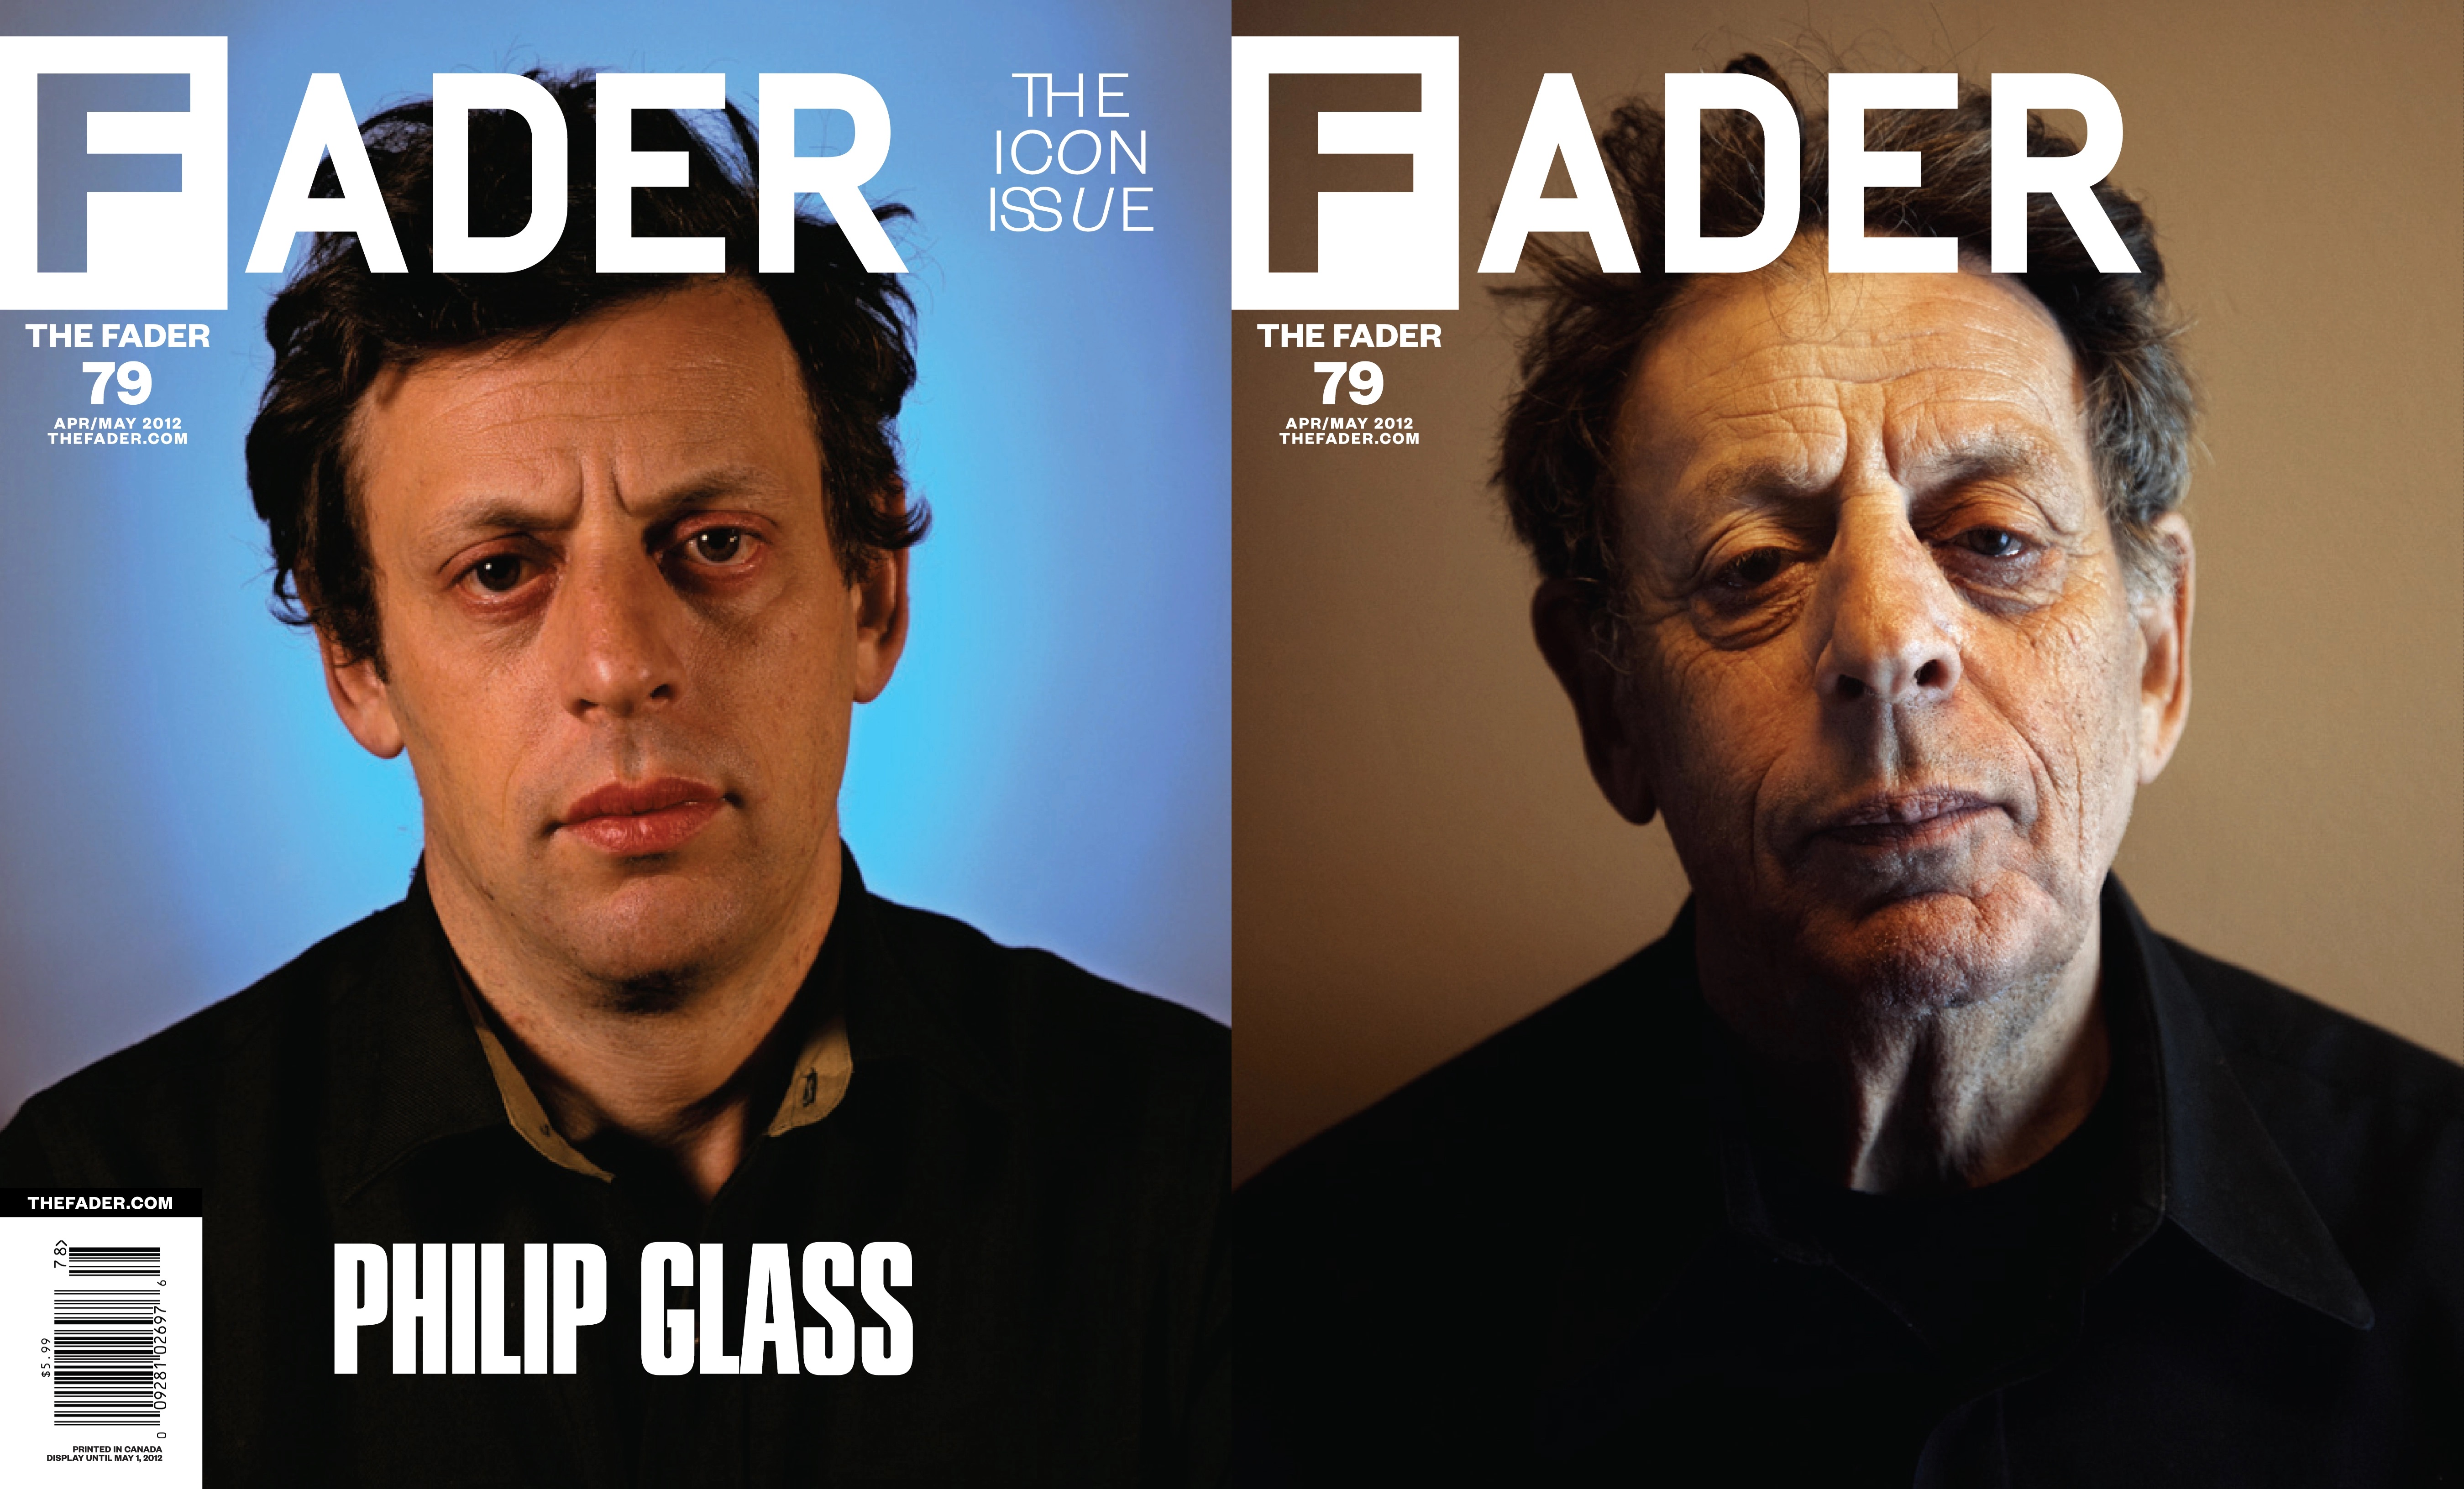 The Fader-April/May 2012: "Philip Glass"